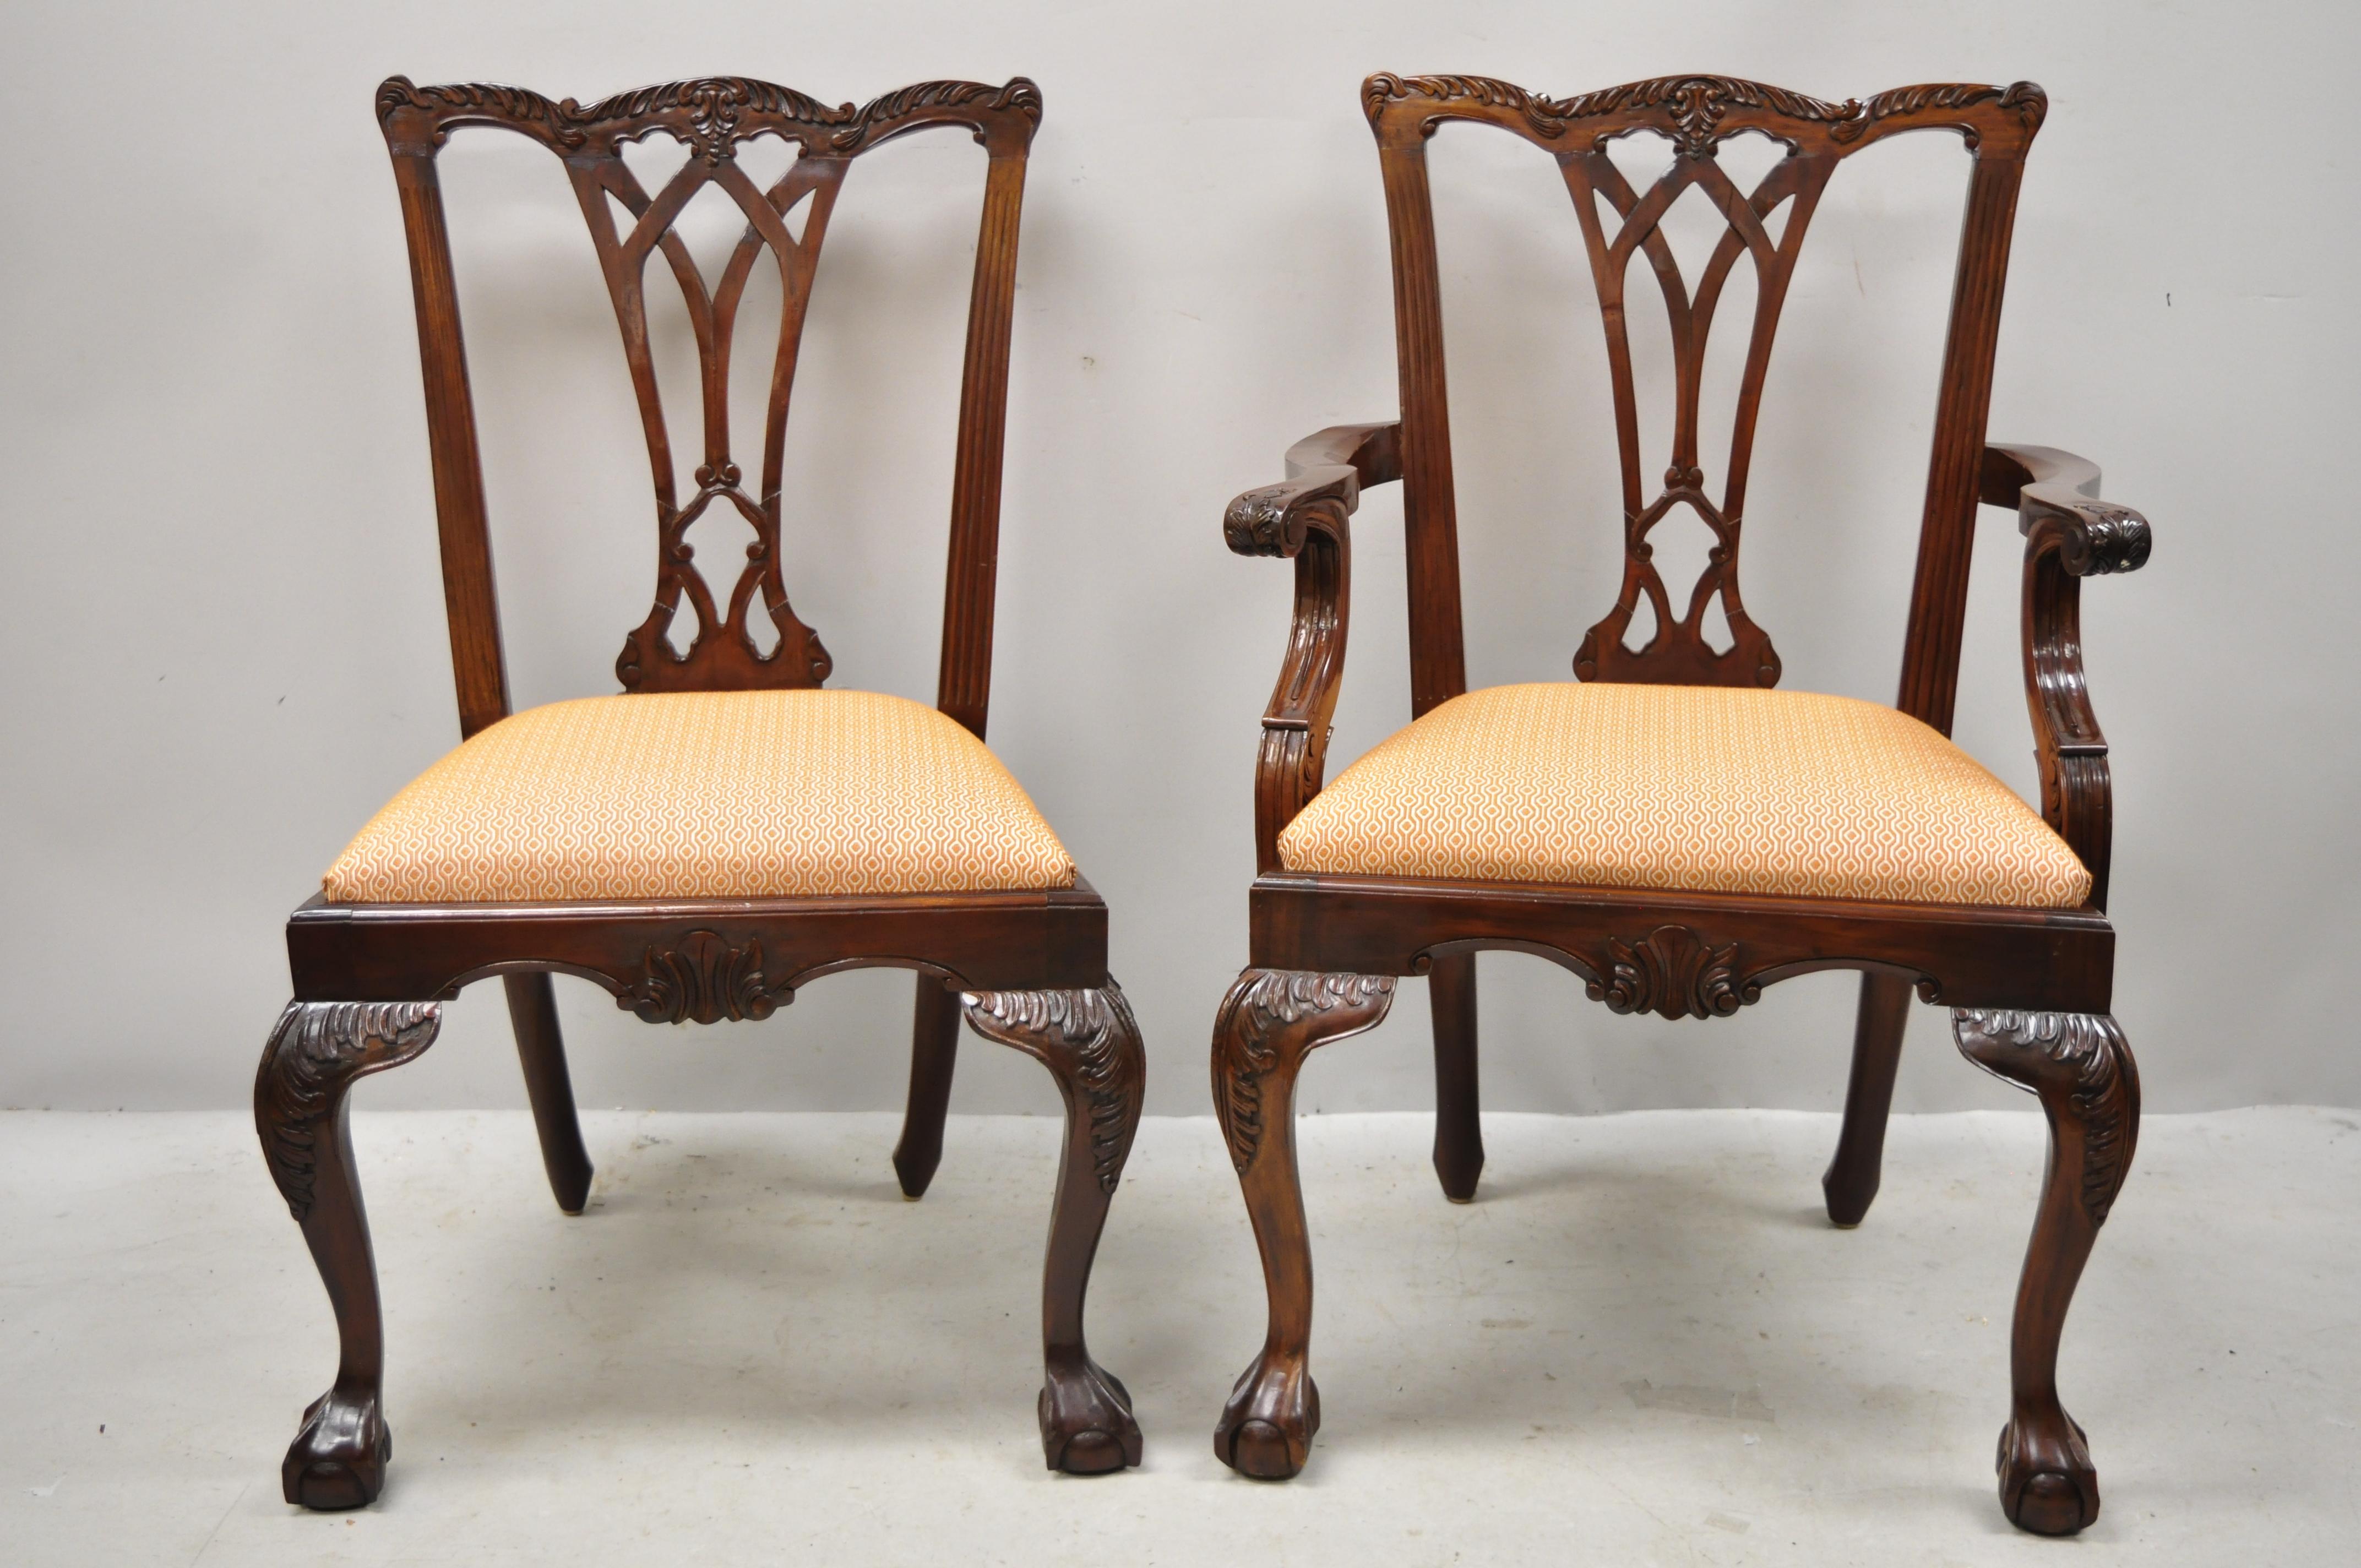 Late 20th century Chippendale style carved ball and claw mahogany dining chairs - set of 8. Set includes (2) armchairs, (6) side chairs, orange printed drop seats, solid wood construction, beautiful wood grain, nicely carved details, carved ball and